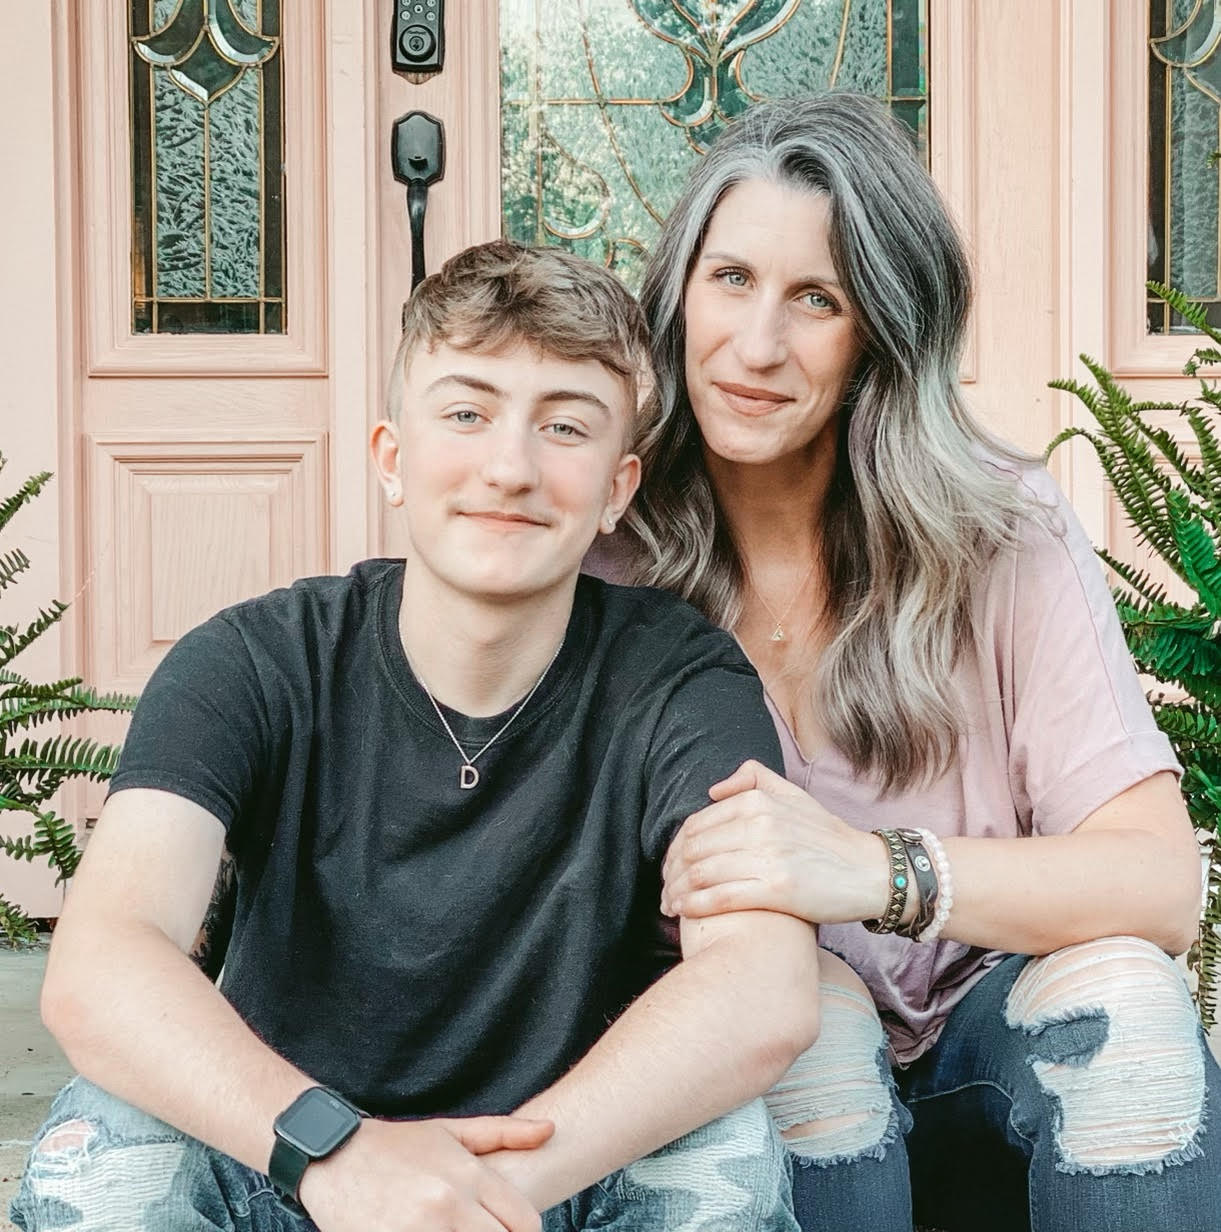 Dylan, a white boy in a black tshirt with blonde hair, and his mom, Joanna, a white women with gray hair and a pink tshirt sitting on a poarch with a peach-painted wood and green stained glass windows.